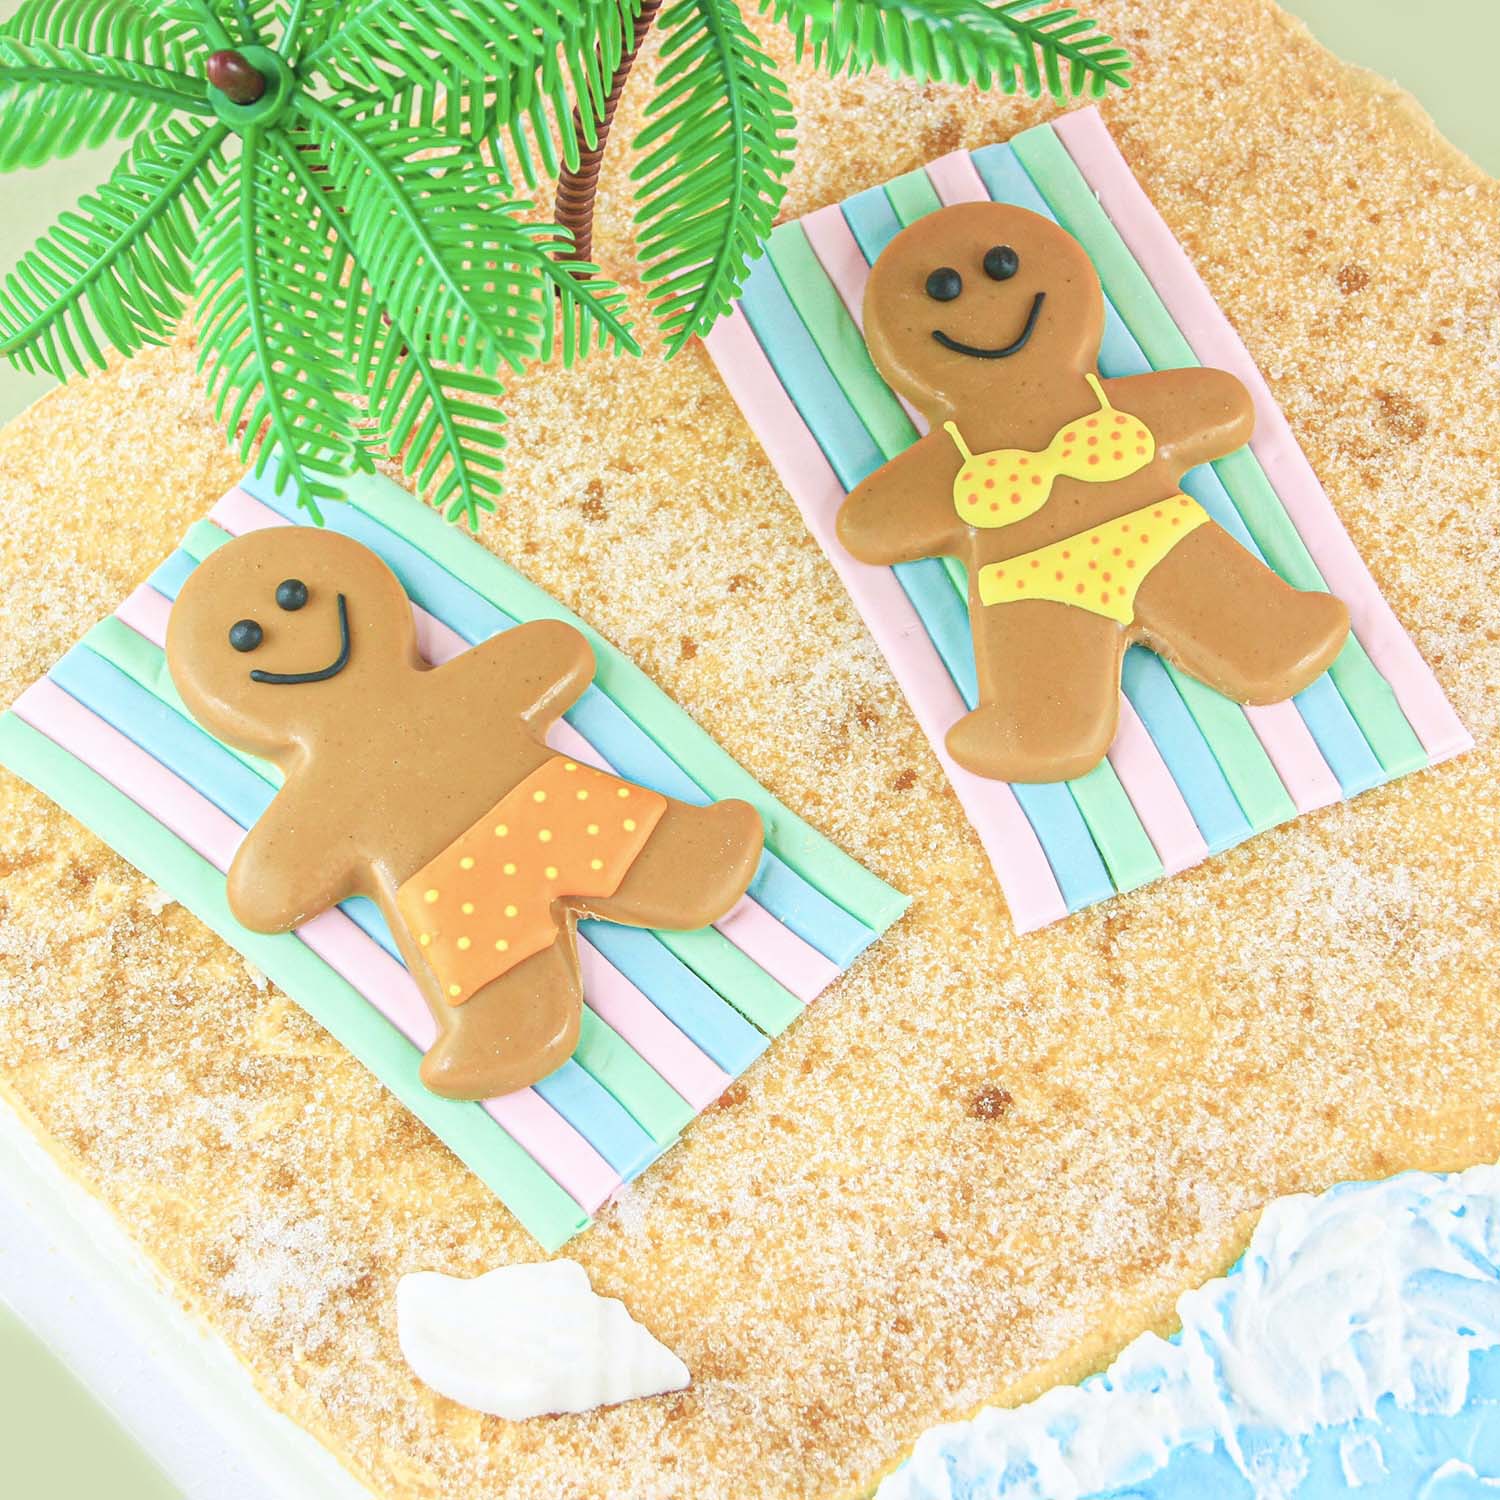 gingerbread boy and girl at beach cake